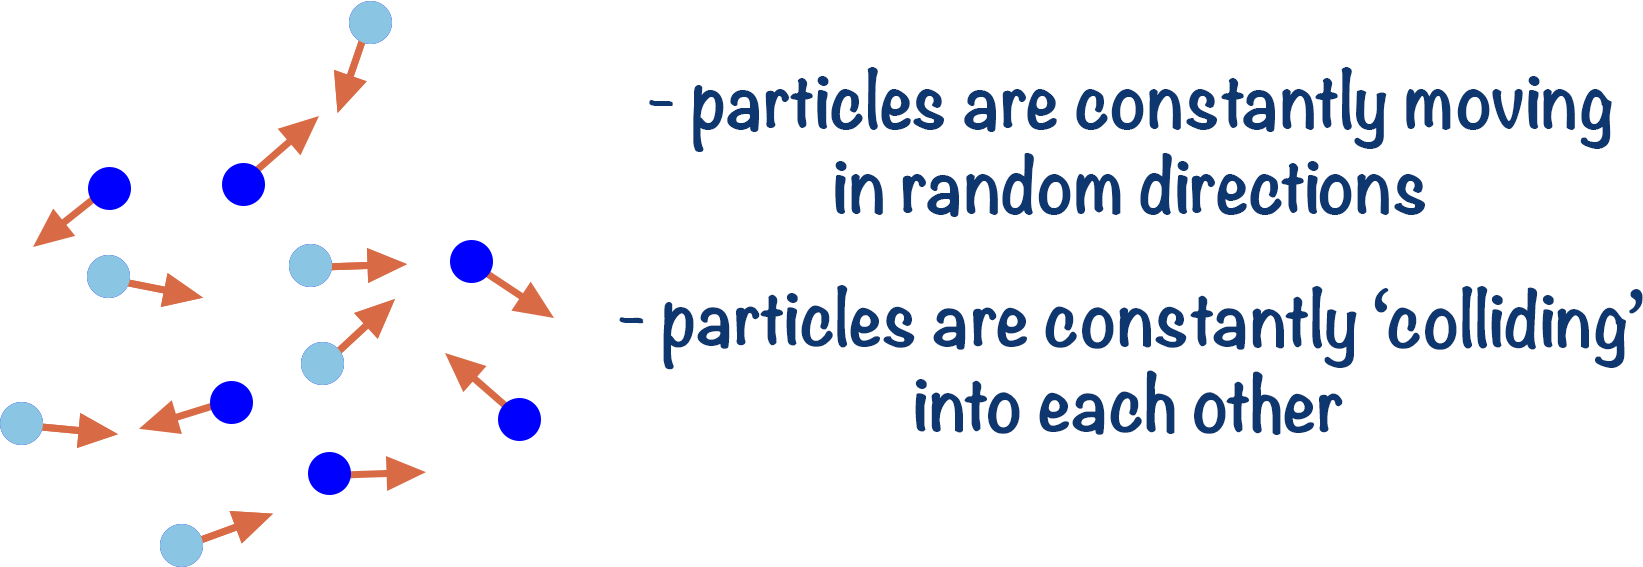 brownian motion of particles kinetic theory a-level chemistry kinetics